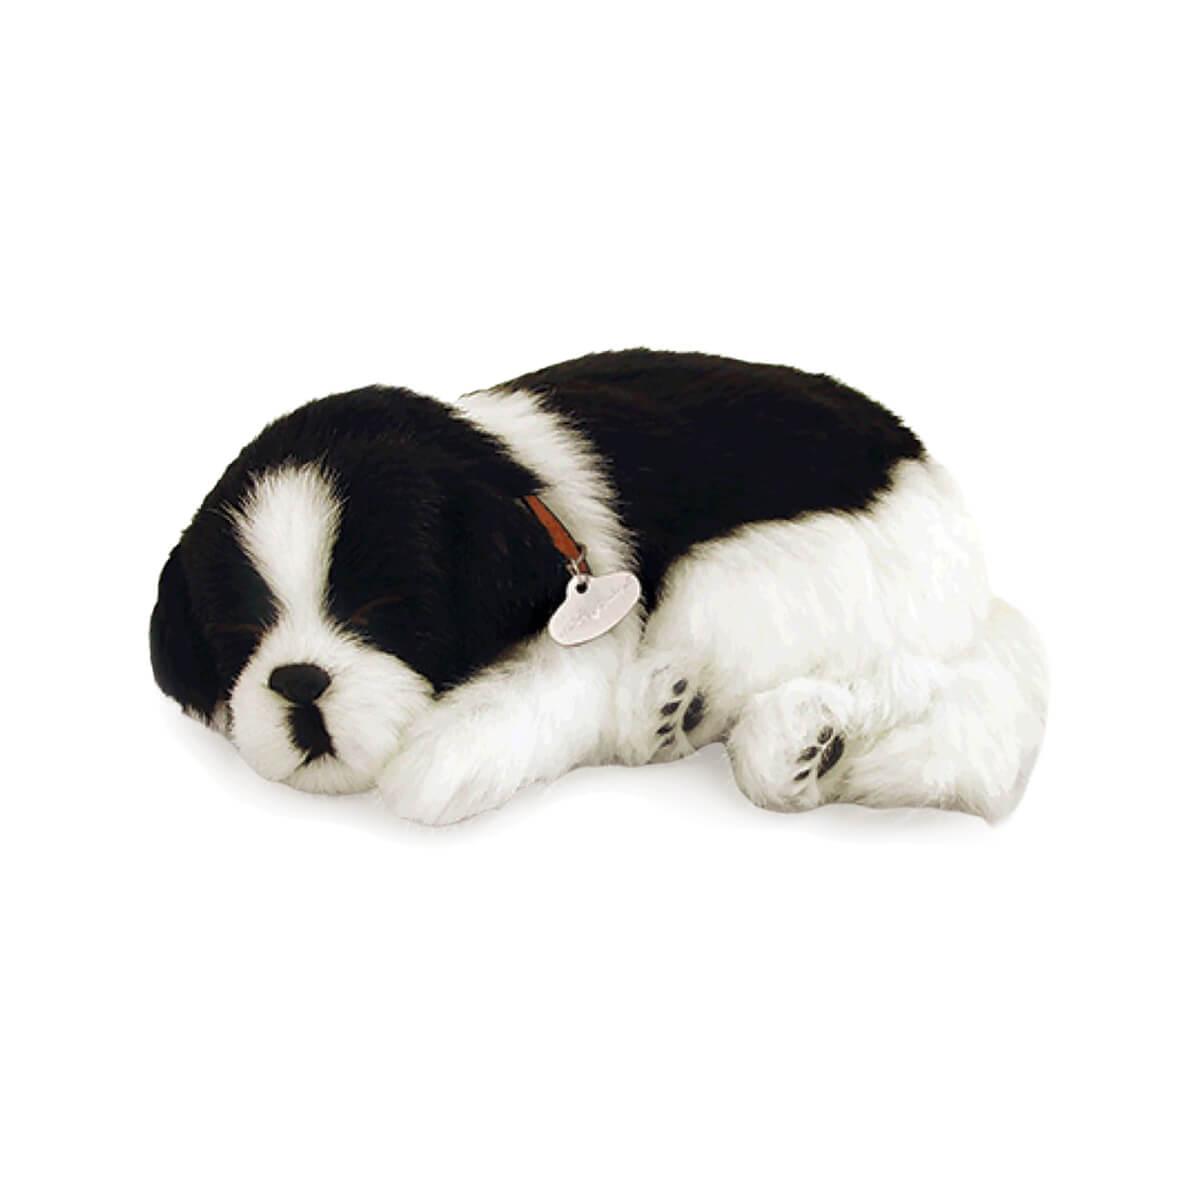 Border Collie Realistic Plush;Stuffed Animal Plush Toy, Gifts for Kids